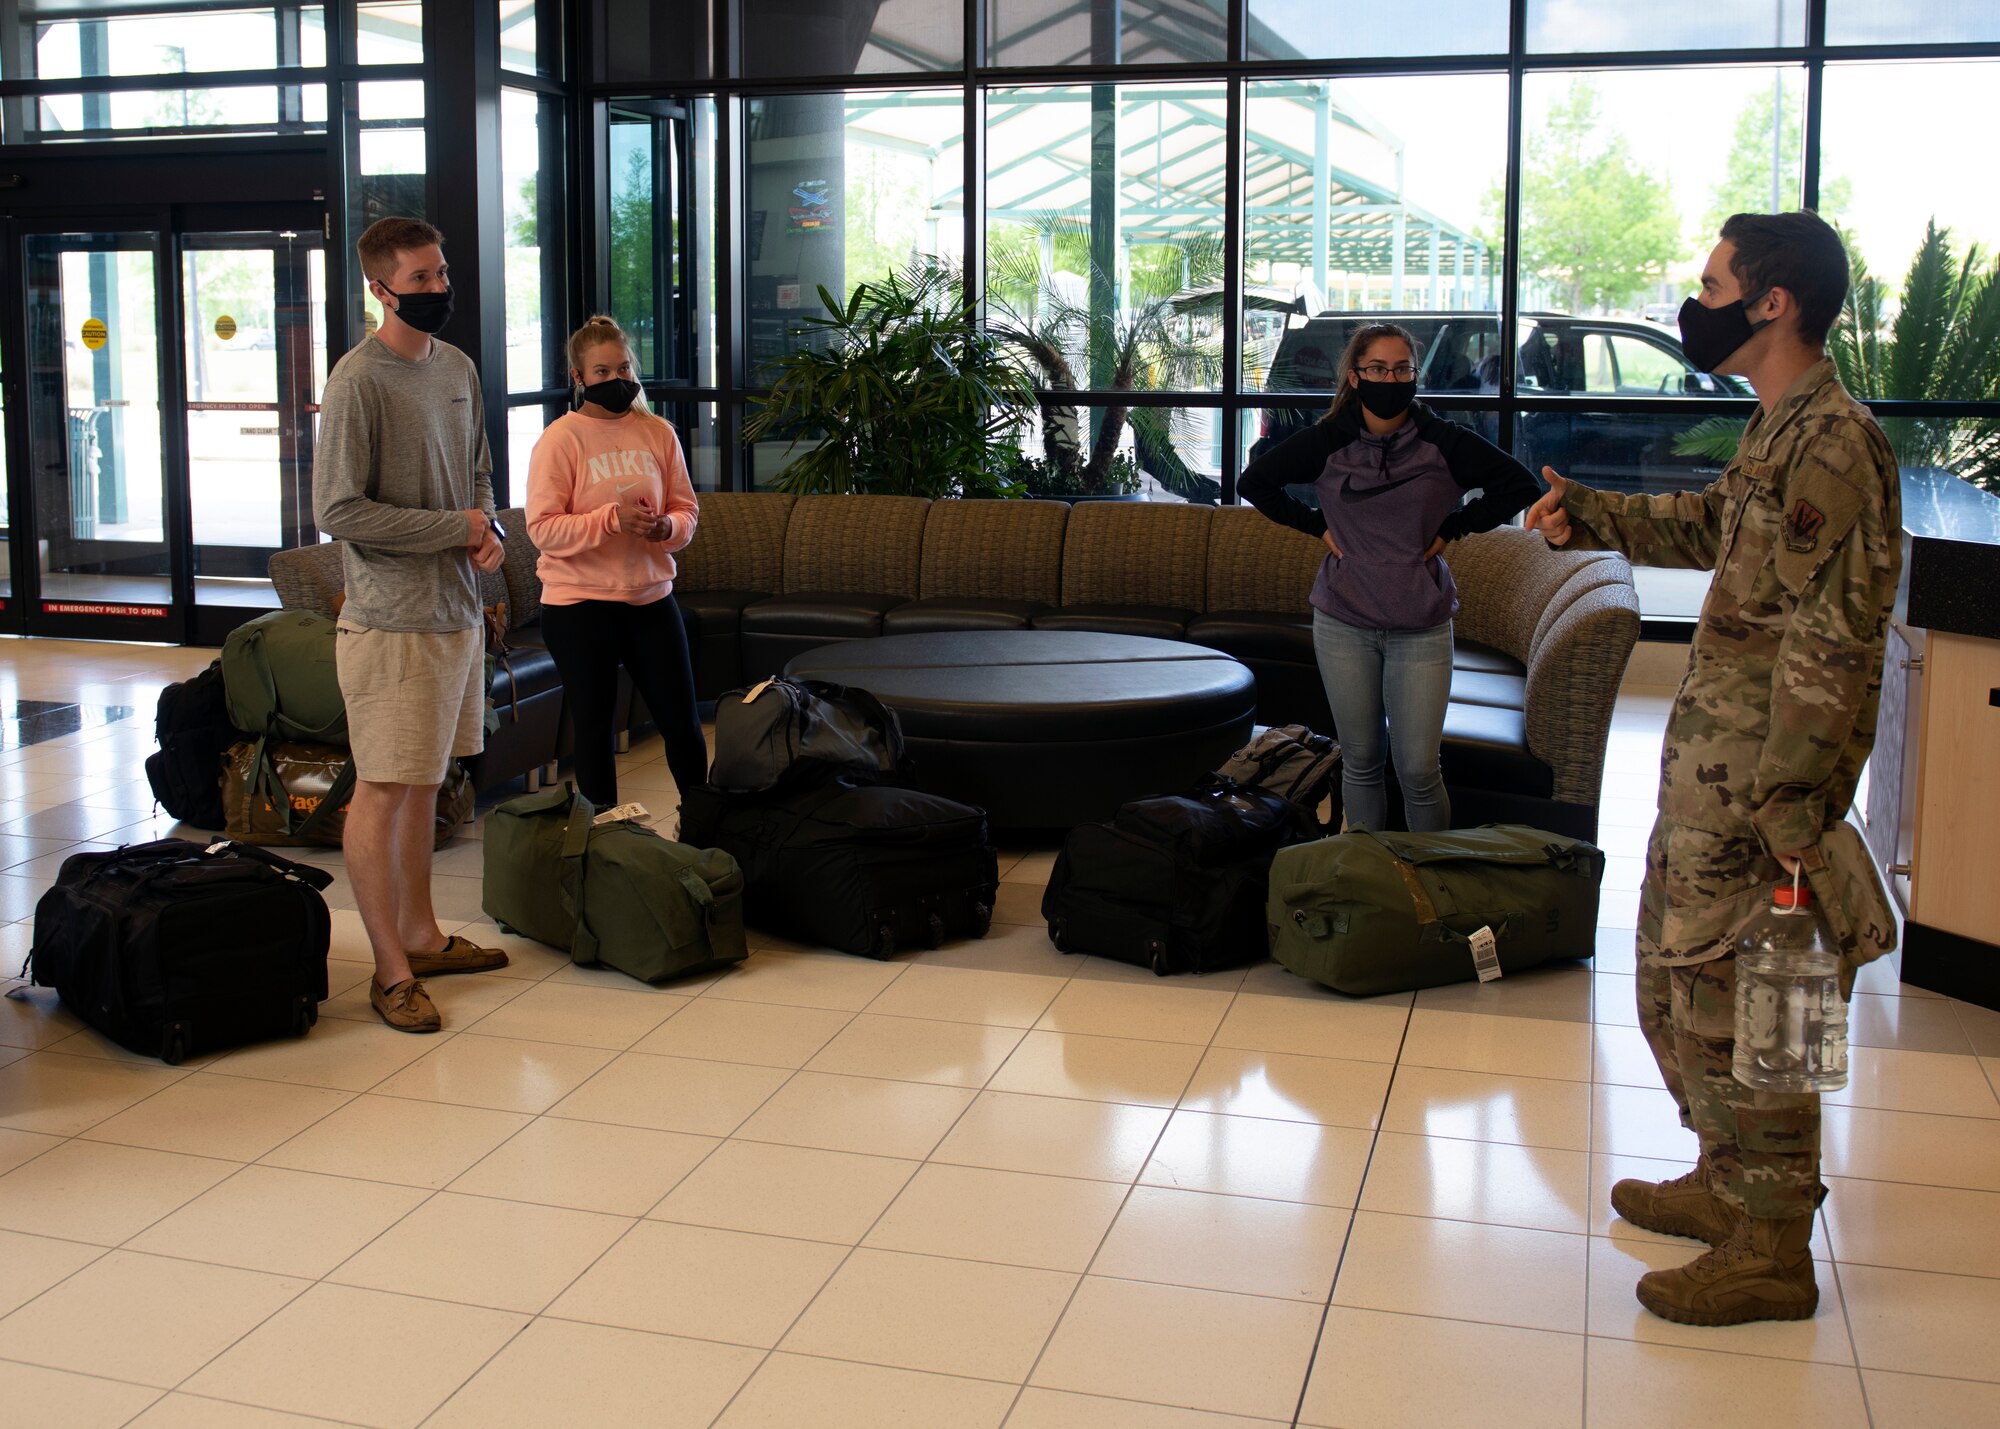 A member of Task Force Roadrunner briefs Airmen on new inprocessing procedures at the Northwest Florida Beaches International Airport in Panama City, Florida, May 5, 2020. Task Force Roadrunner was established at Tyndall Air Force Base to allow technical training graduates to safely inprocess during the COVID-19 Pandemic. (U.S. Air Force photo by Brad Sturk)